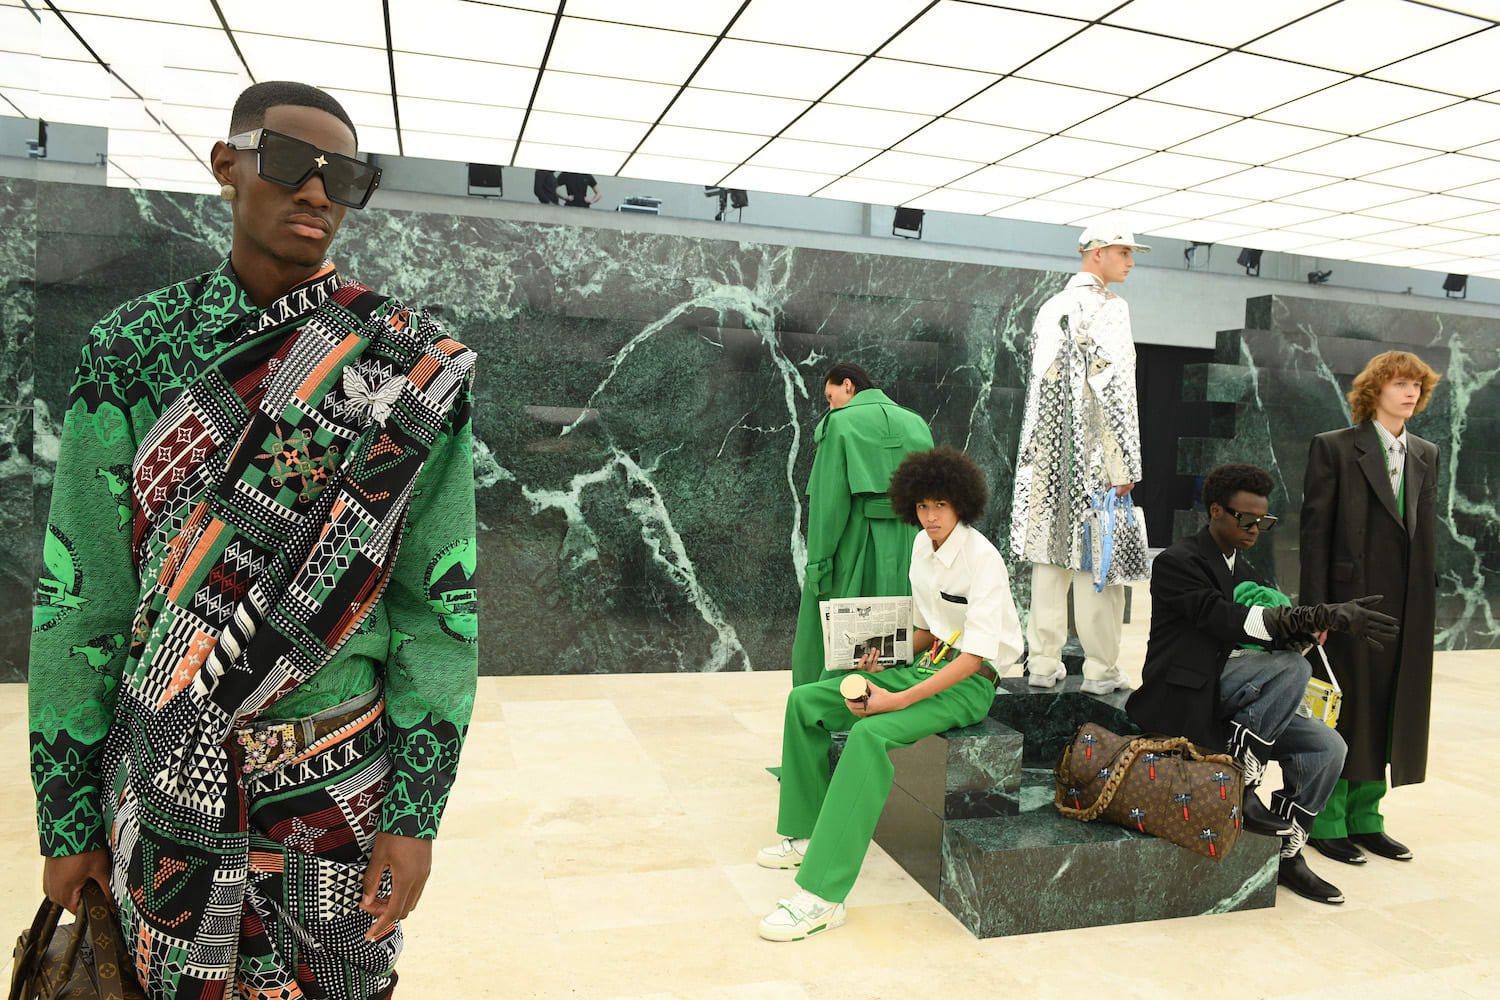 Pharrell Williams Is Officially Taking Over For Virgil Abloh at Louis  Vuitton